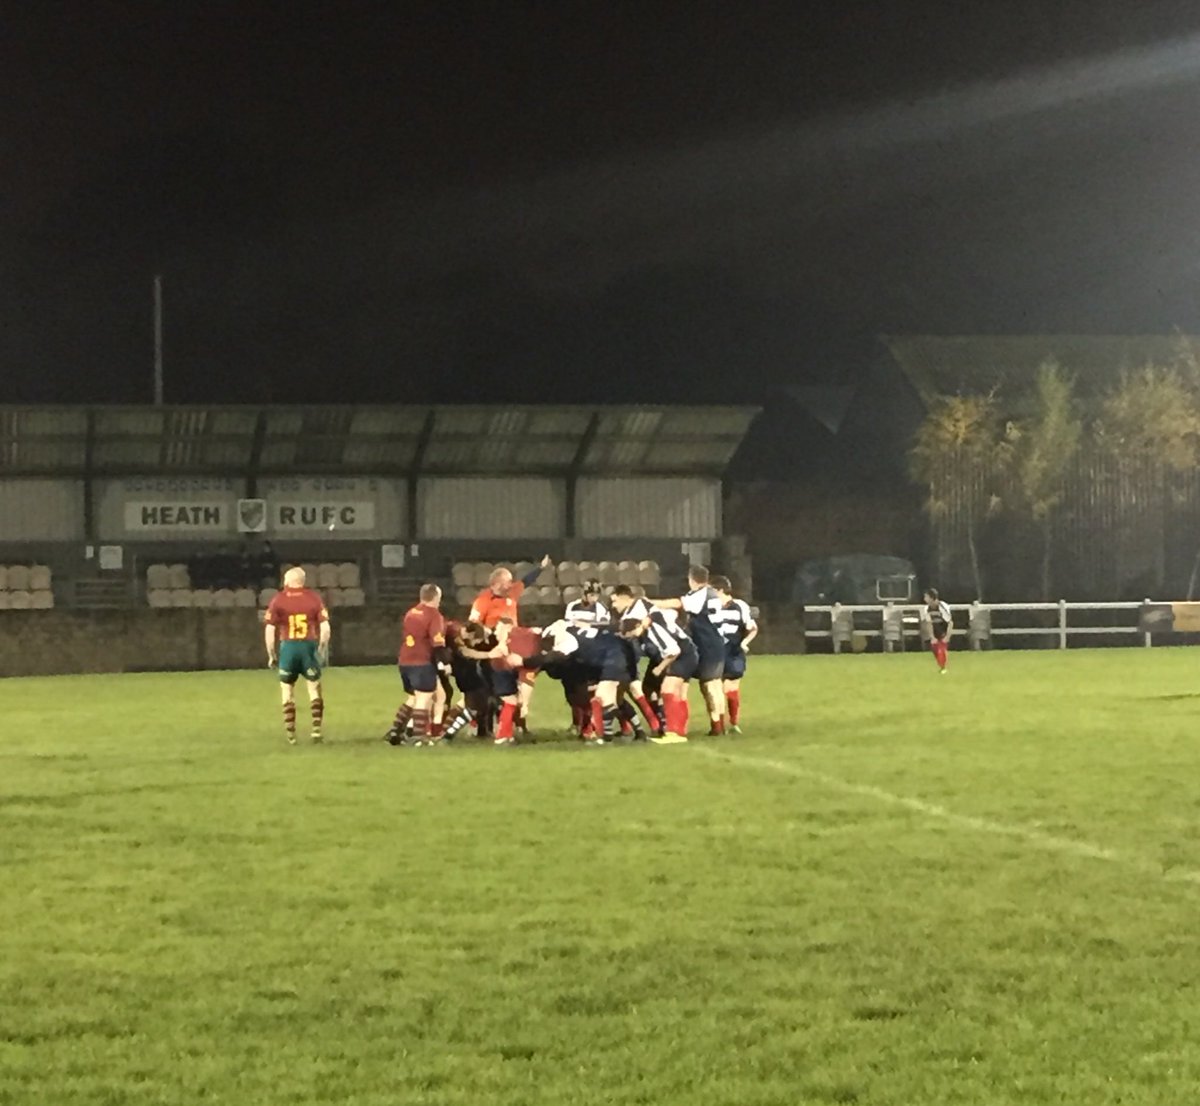 Wednesday Night Lights for @HeathRUFC v @MagpiesRugby. Great to see so many people supporting the game tonight. #projectrugby